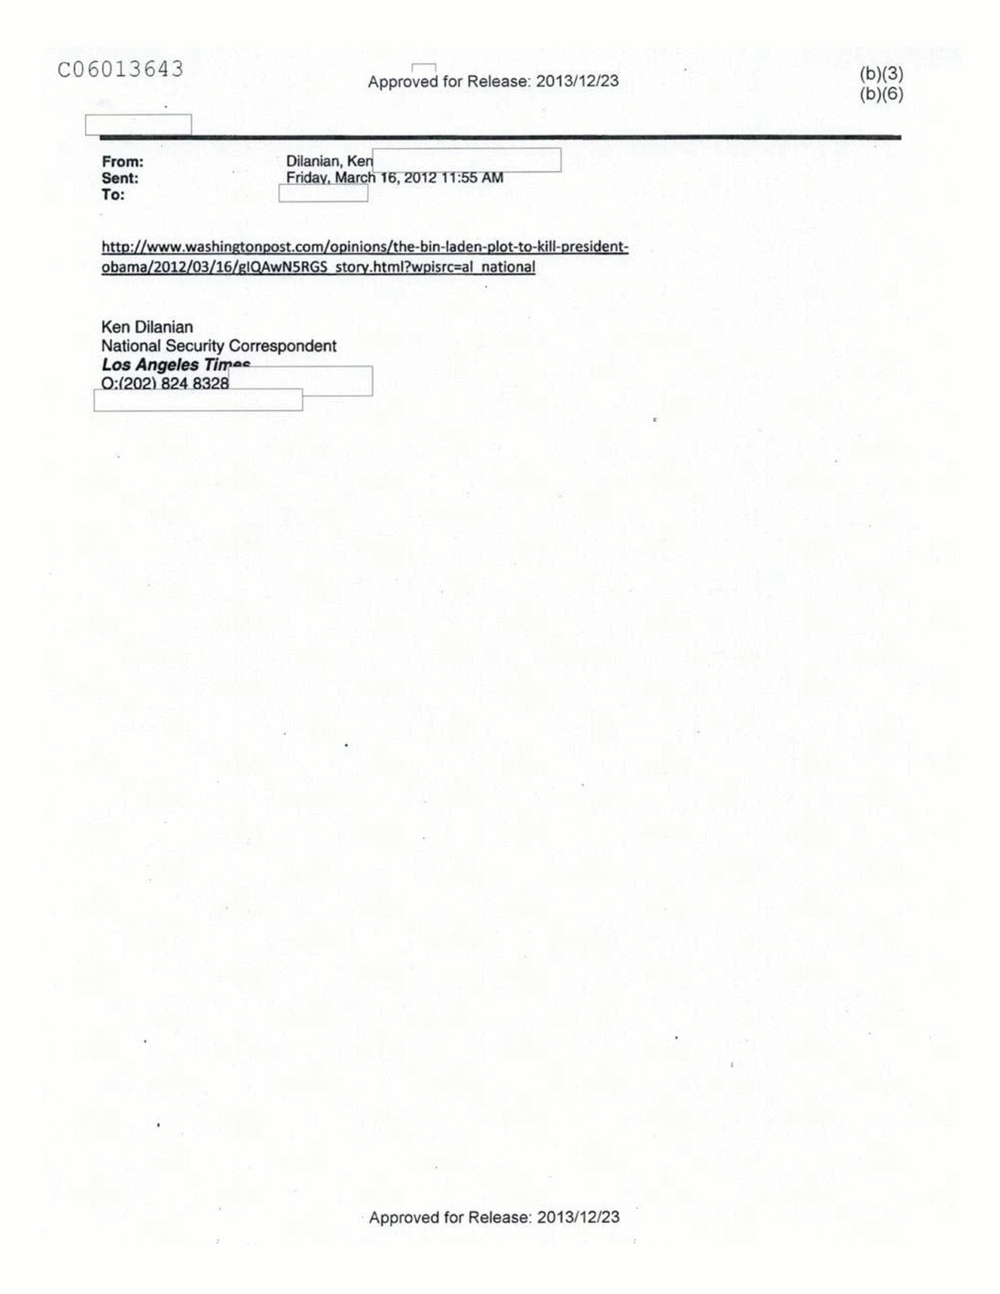 Page 484 from Email Correspondence Between Reporters and CIA Flacks